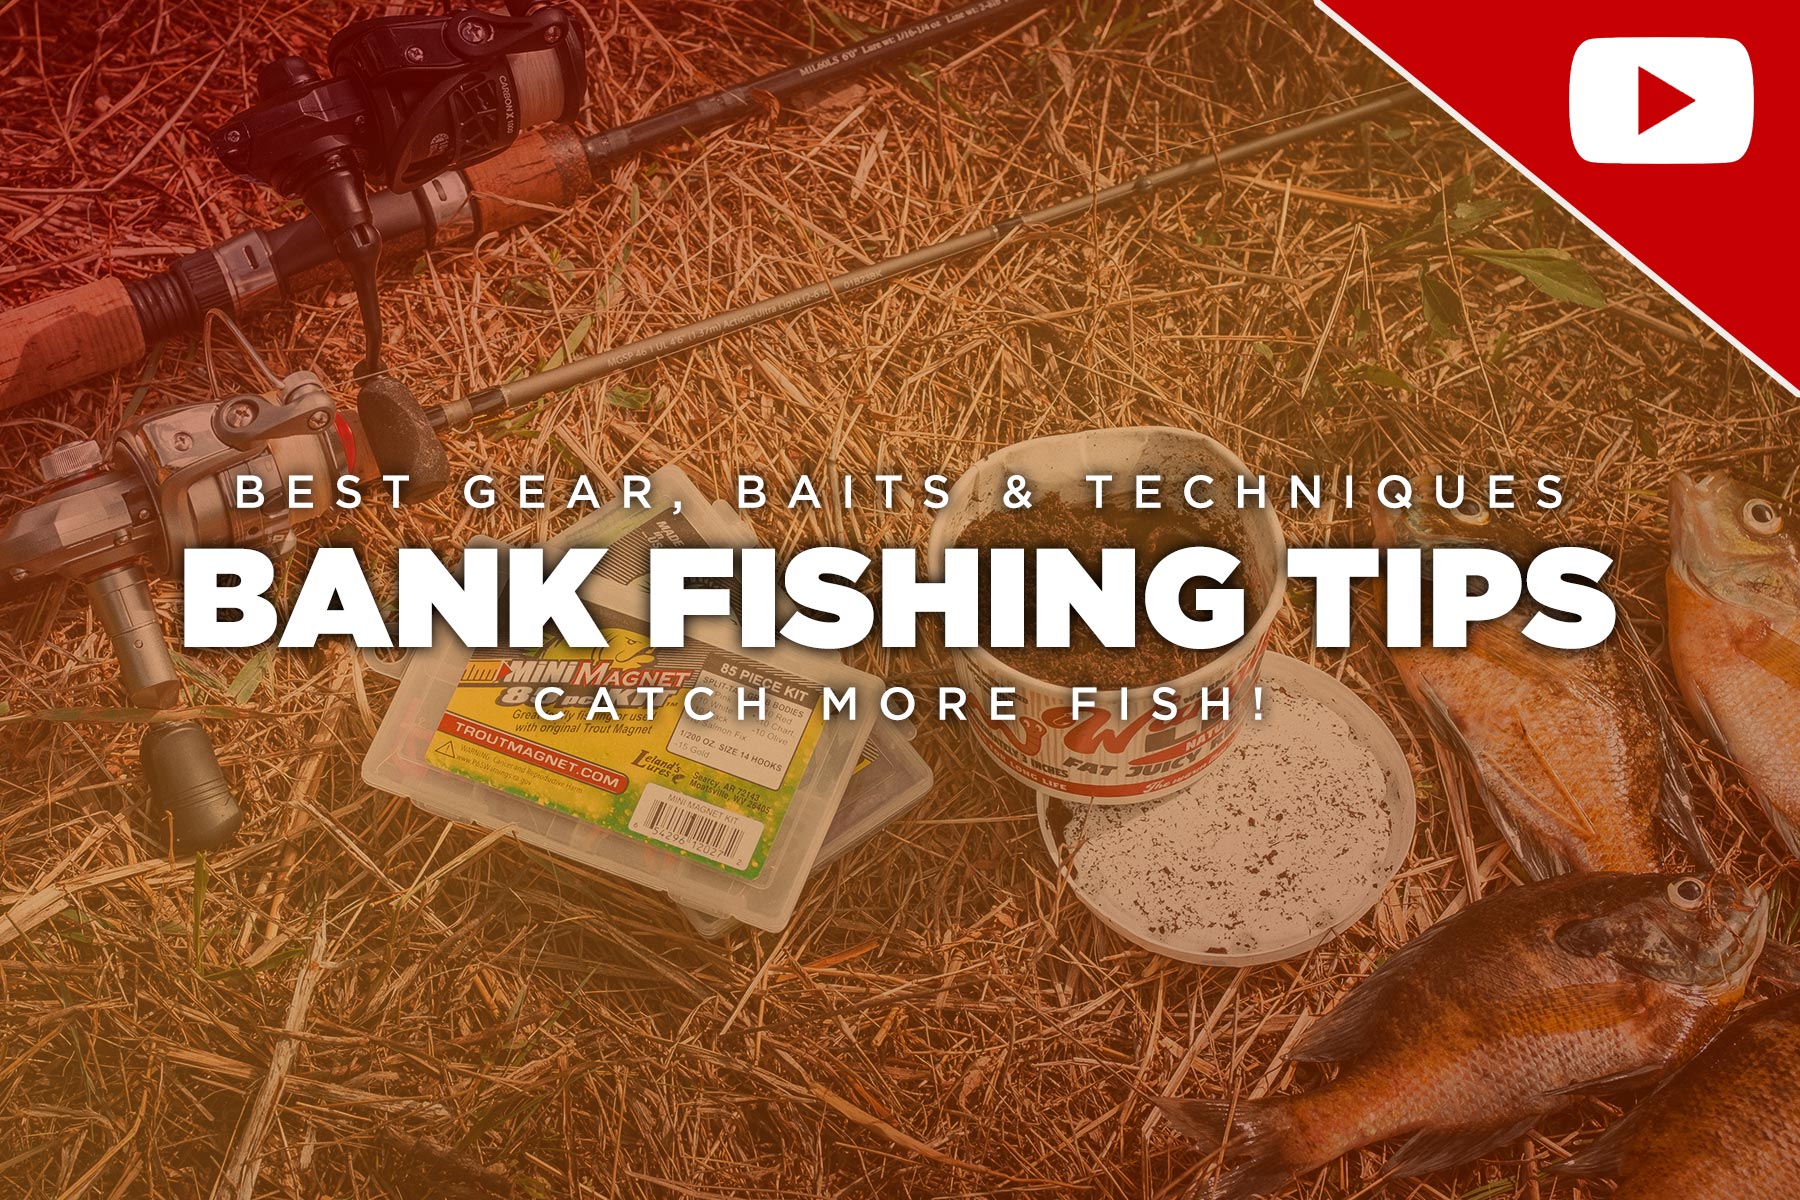 Fishing Safety Tips for Beginners - AGFC - Gone Fishing